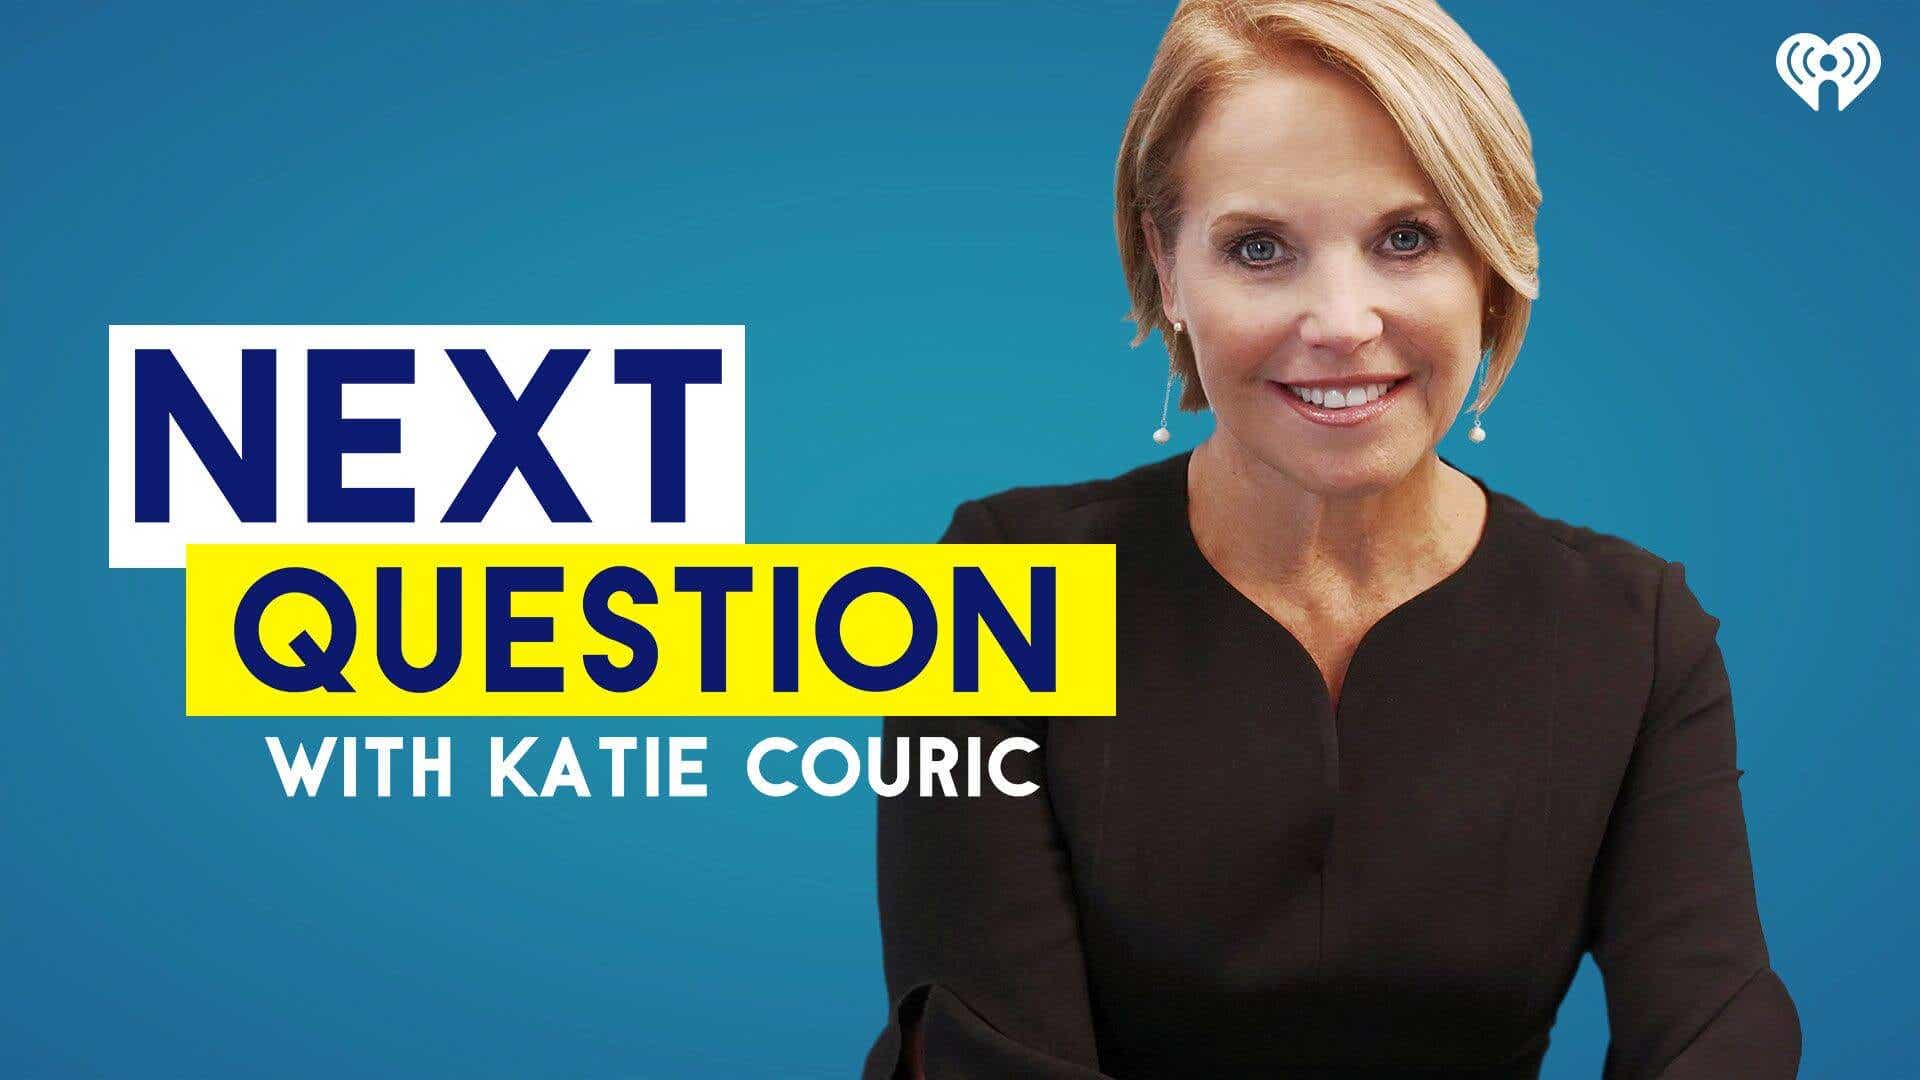 Katie Couric on Next Question